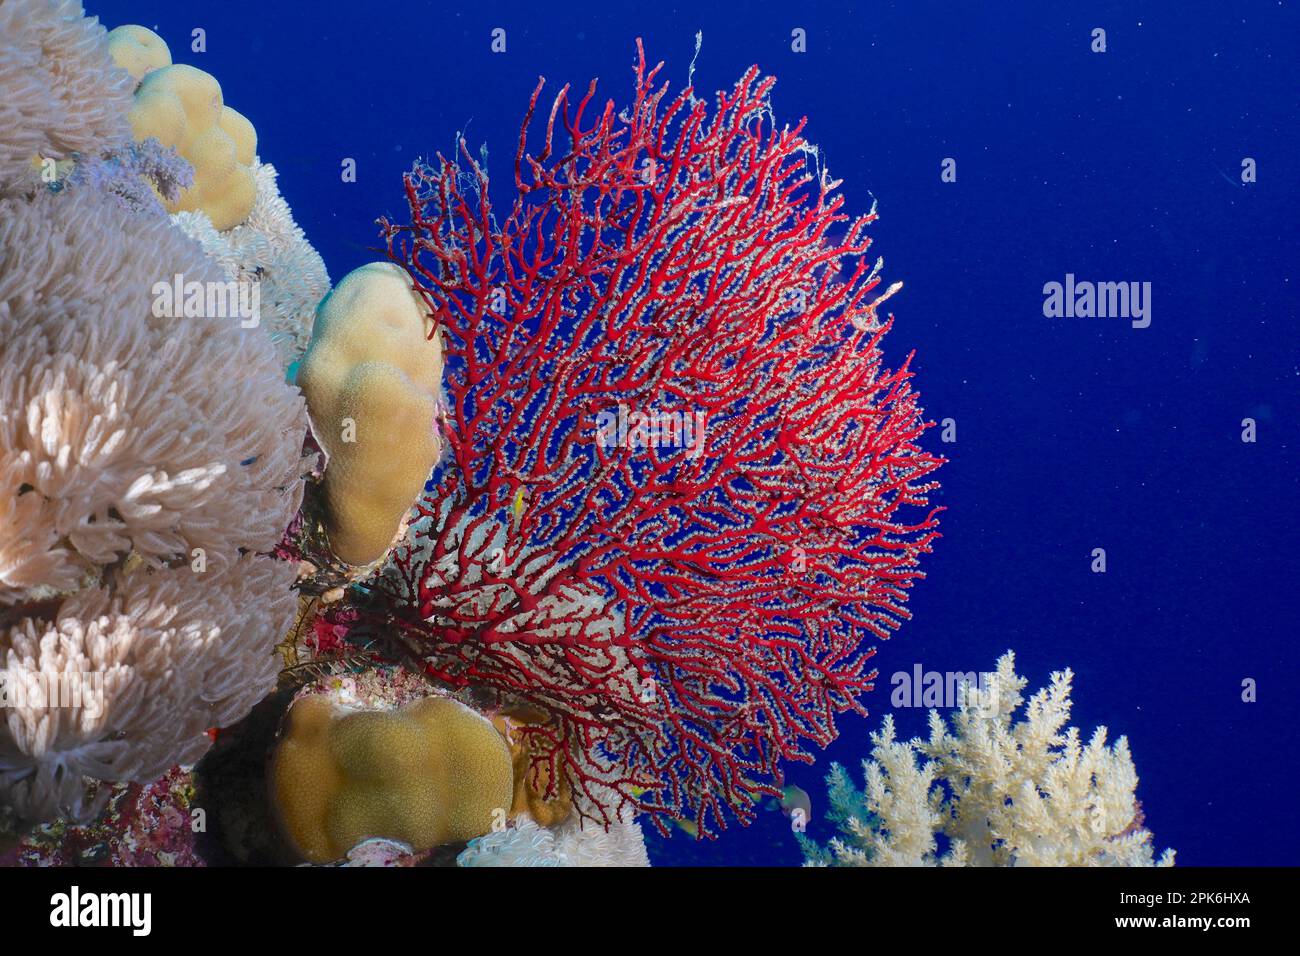 Red knot coral (Acabaria biserialis), gorgonian, Elphinstone reef dive site, Egypt, Red Sea Stock Photo